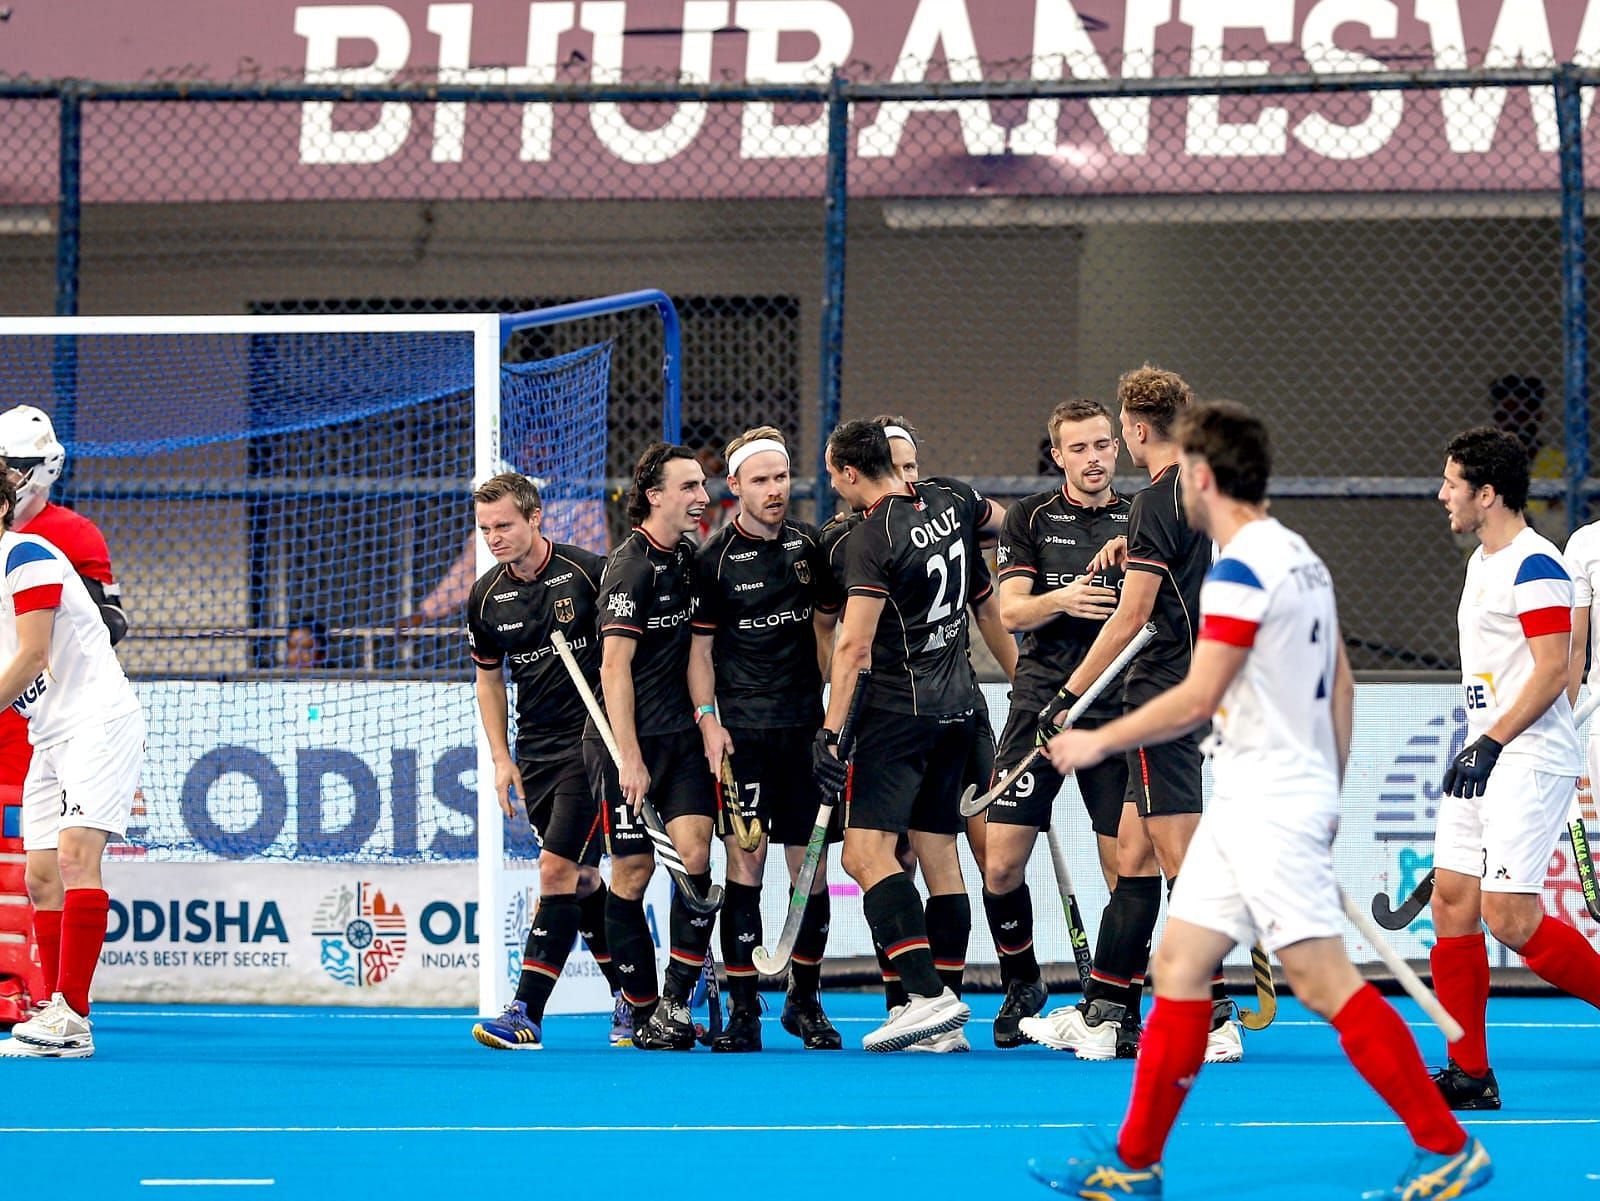 Germany celebrating a goal against France in an earlier match (Image Courtesy: Twitter/Hockey India)